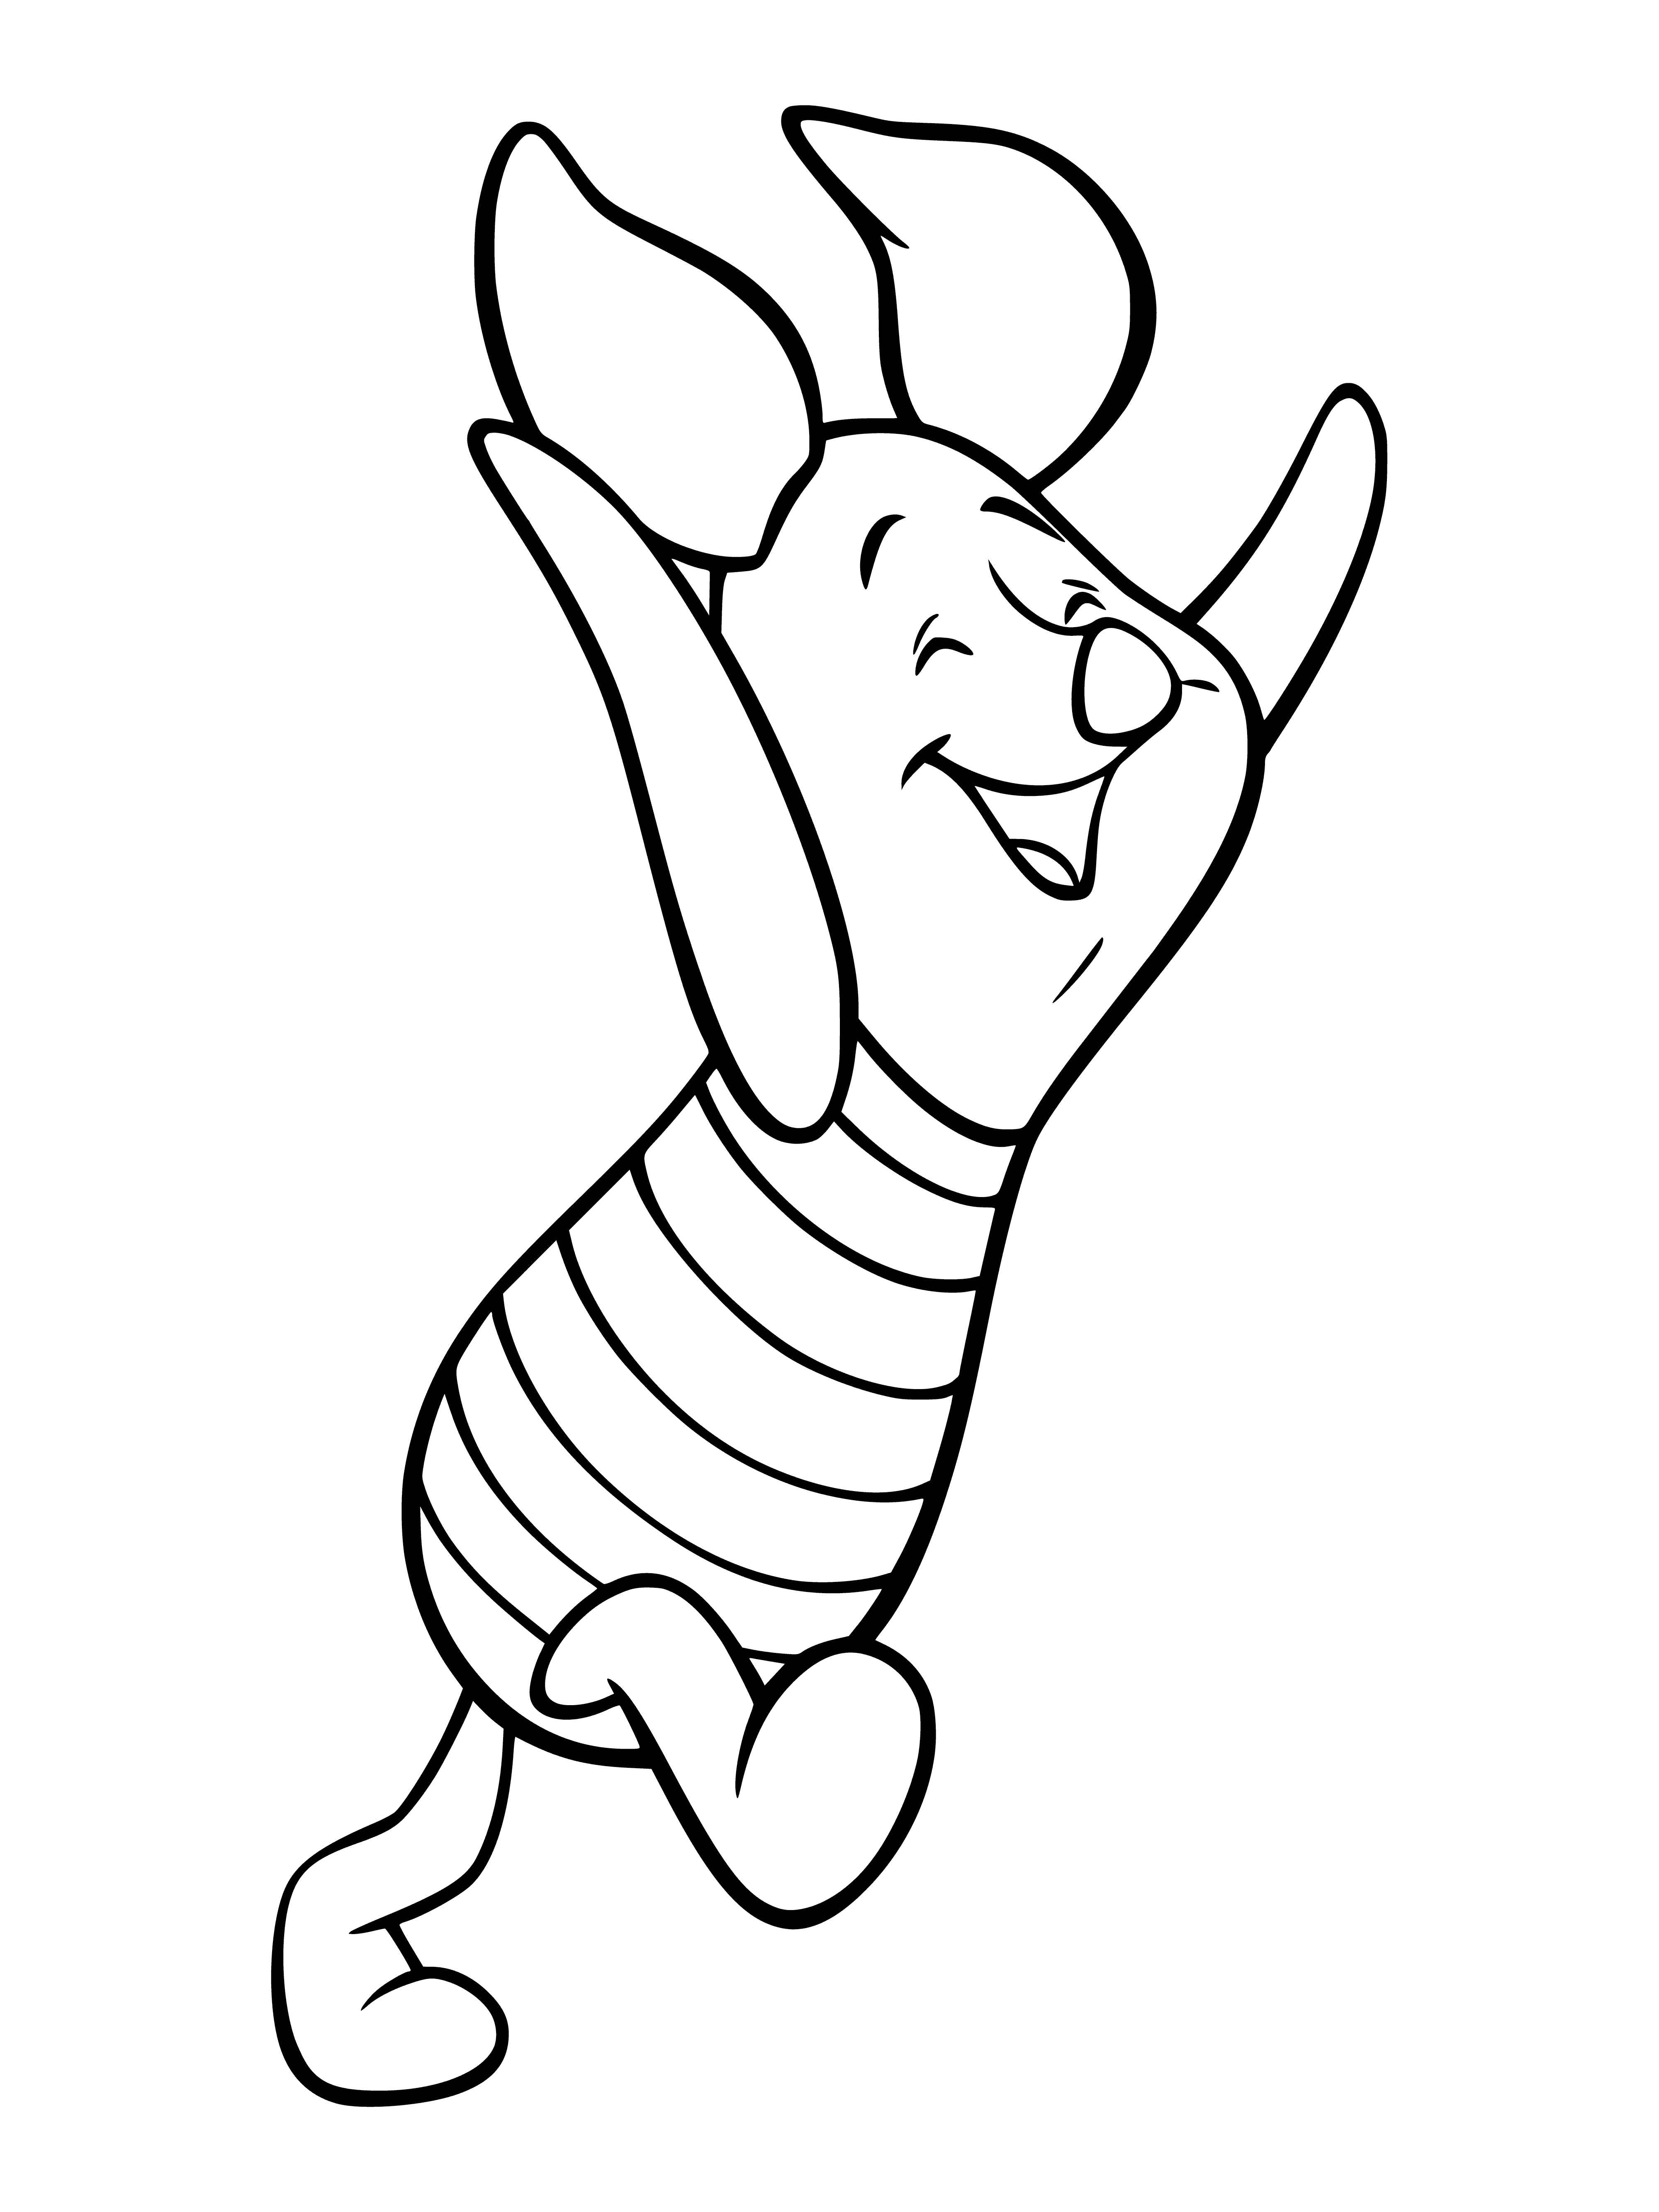 coloring page: Sad cartoon bear sits on the ground, arms at sides, head down.